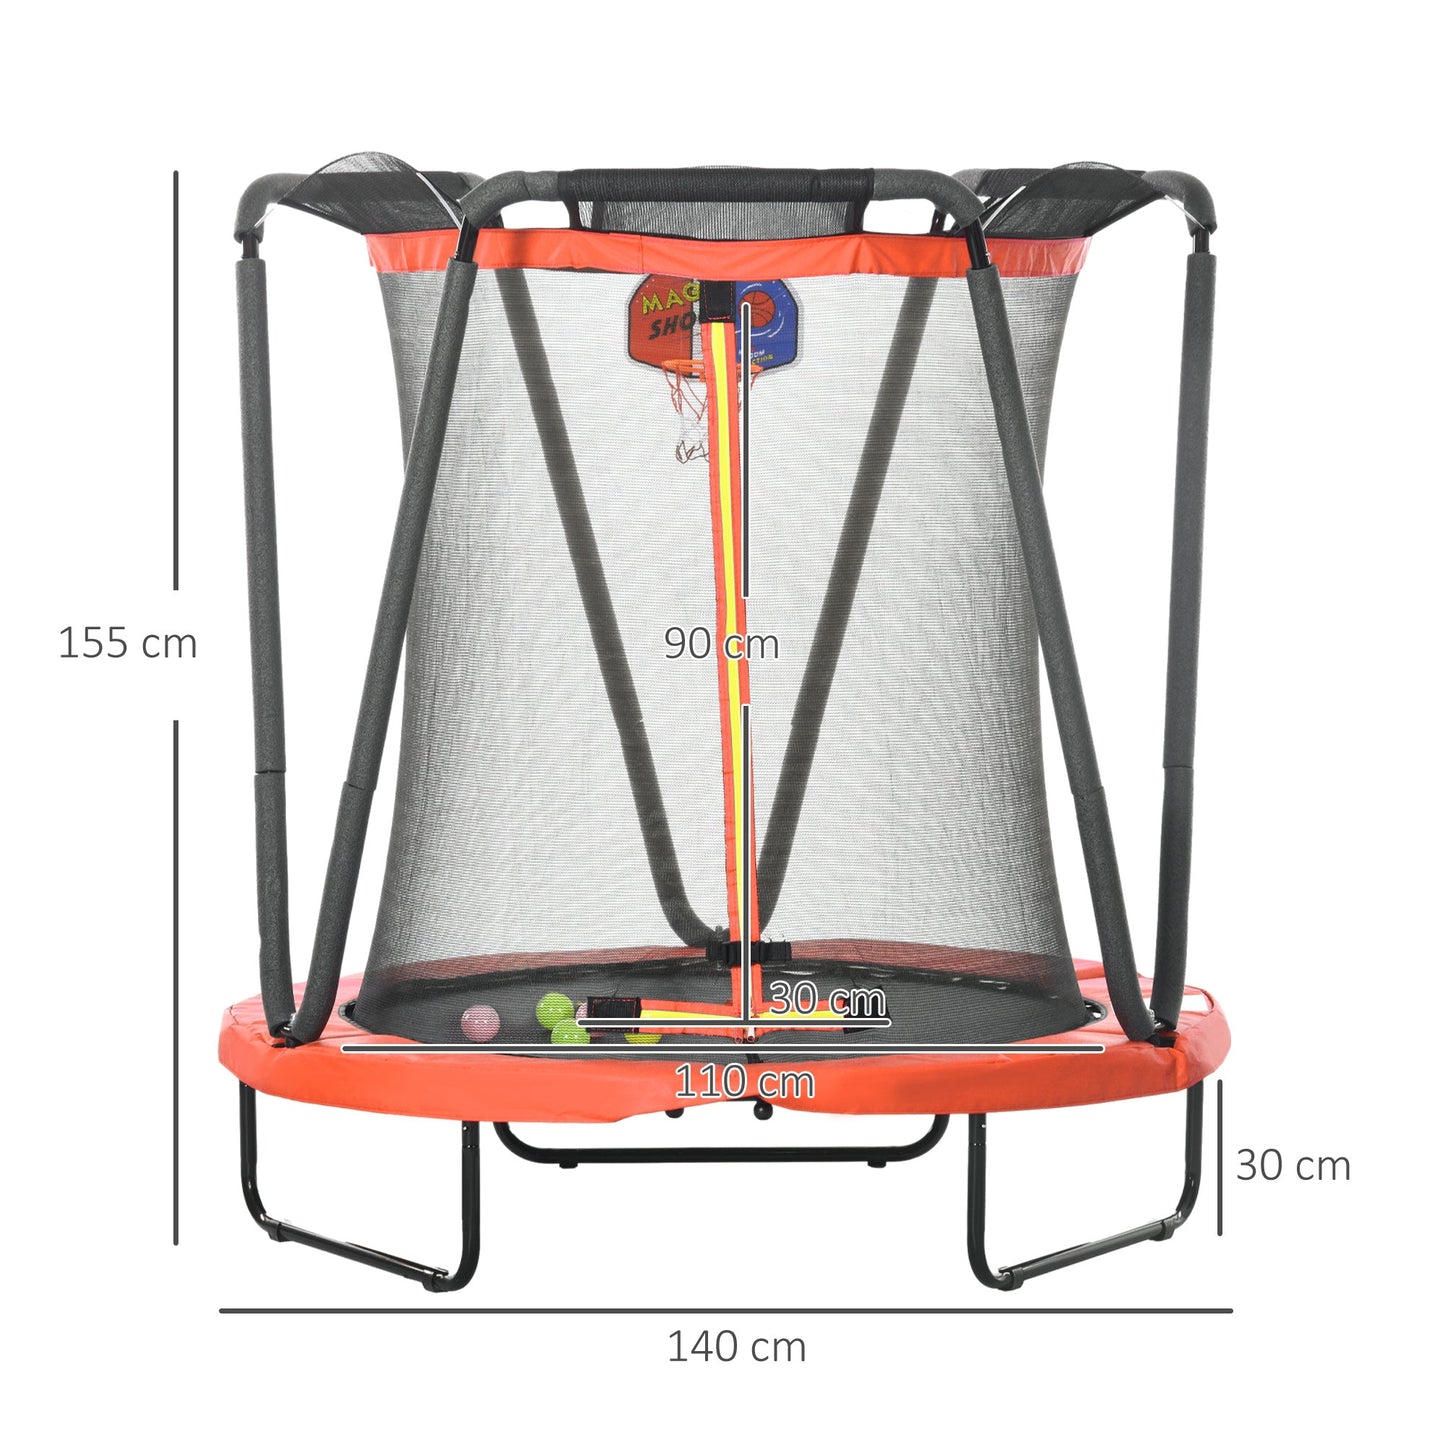 ZONEKIZ 4.6FT Kids Trampoline with Enclosure, Basketball, Sea Balls, Hoop, for Ages 3-10 Years -  Red